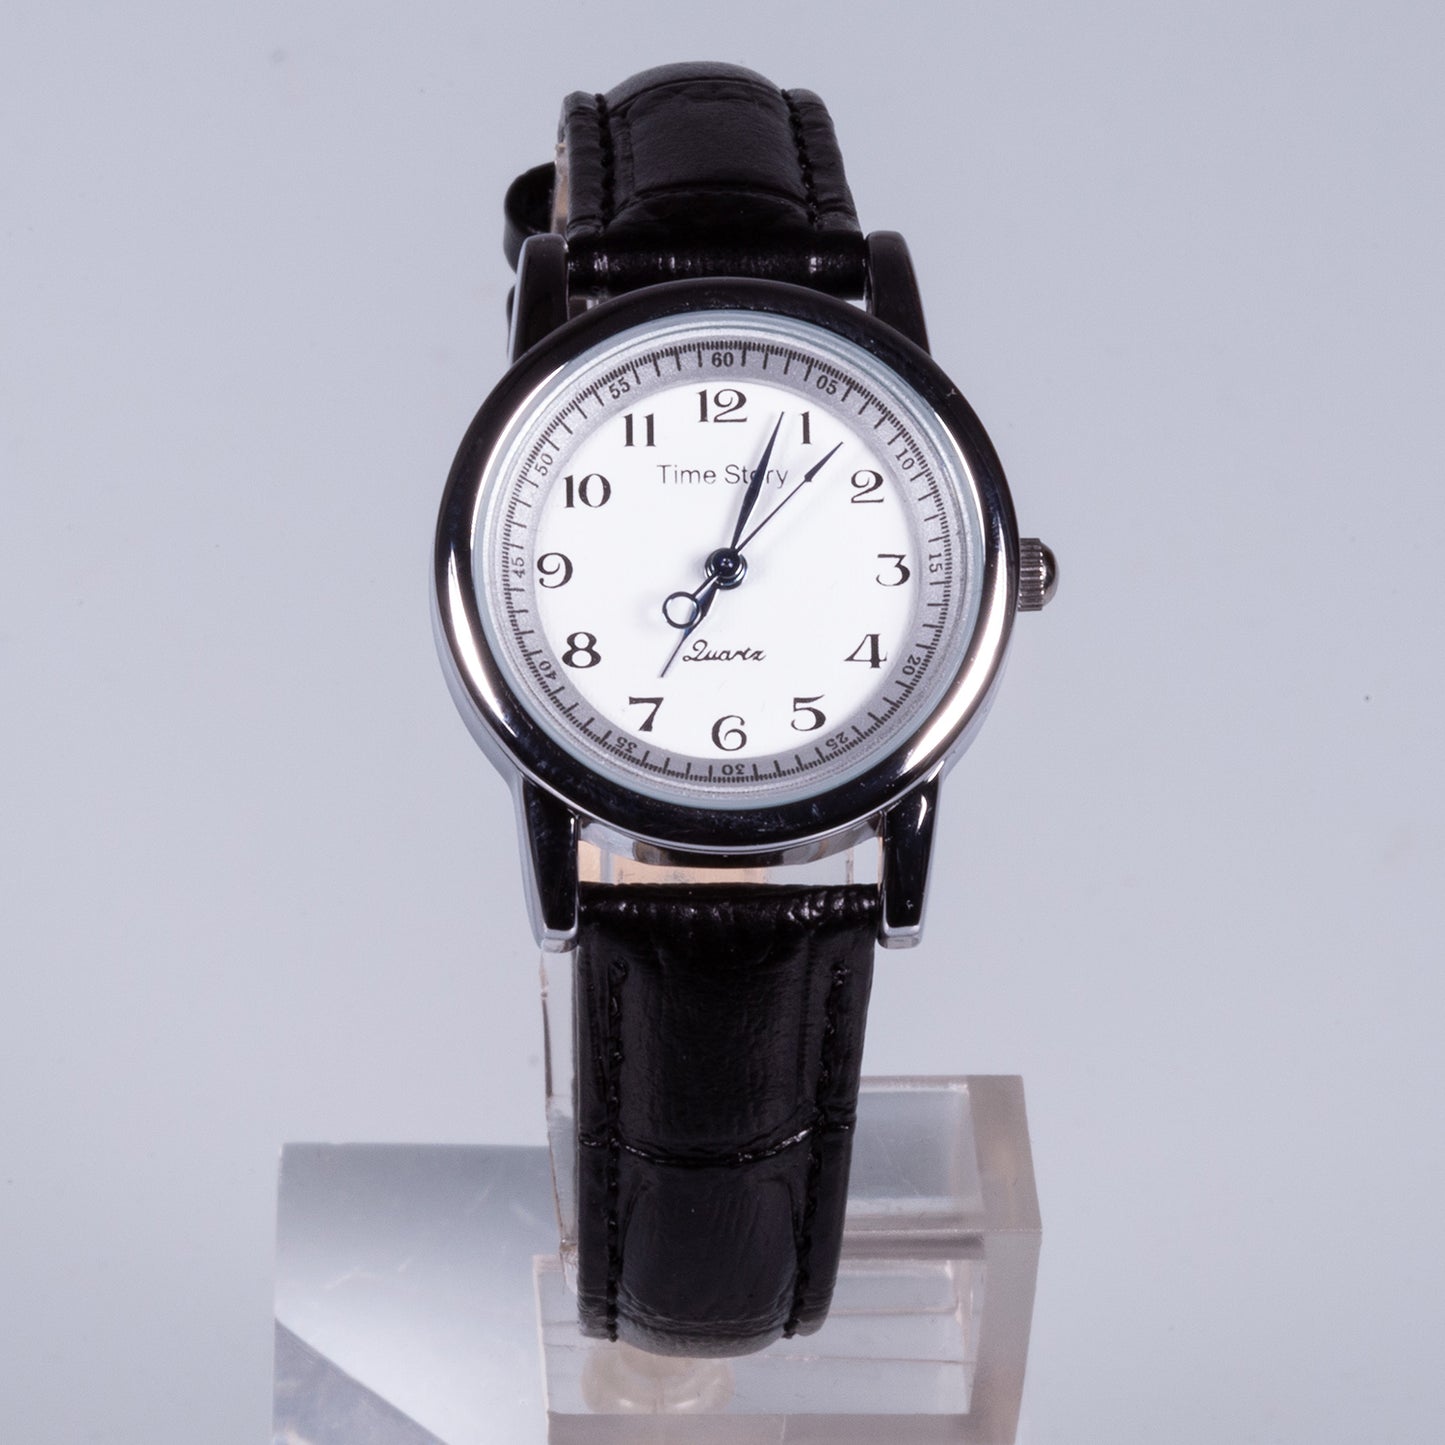 WHITE colour DIAL, black genuine leather band, stainless steel watch